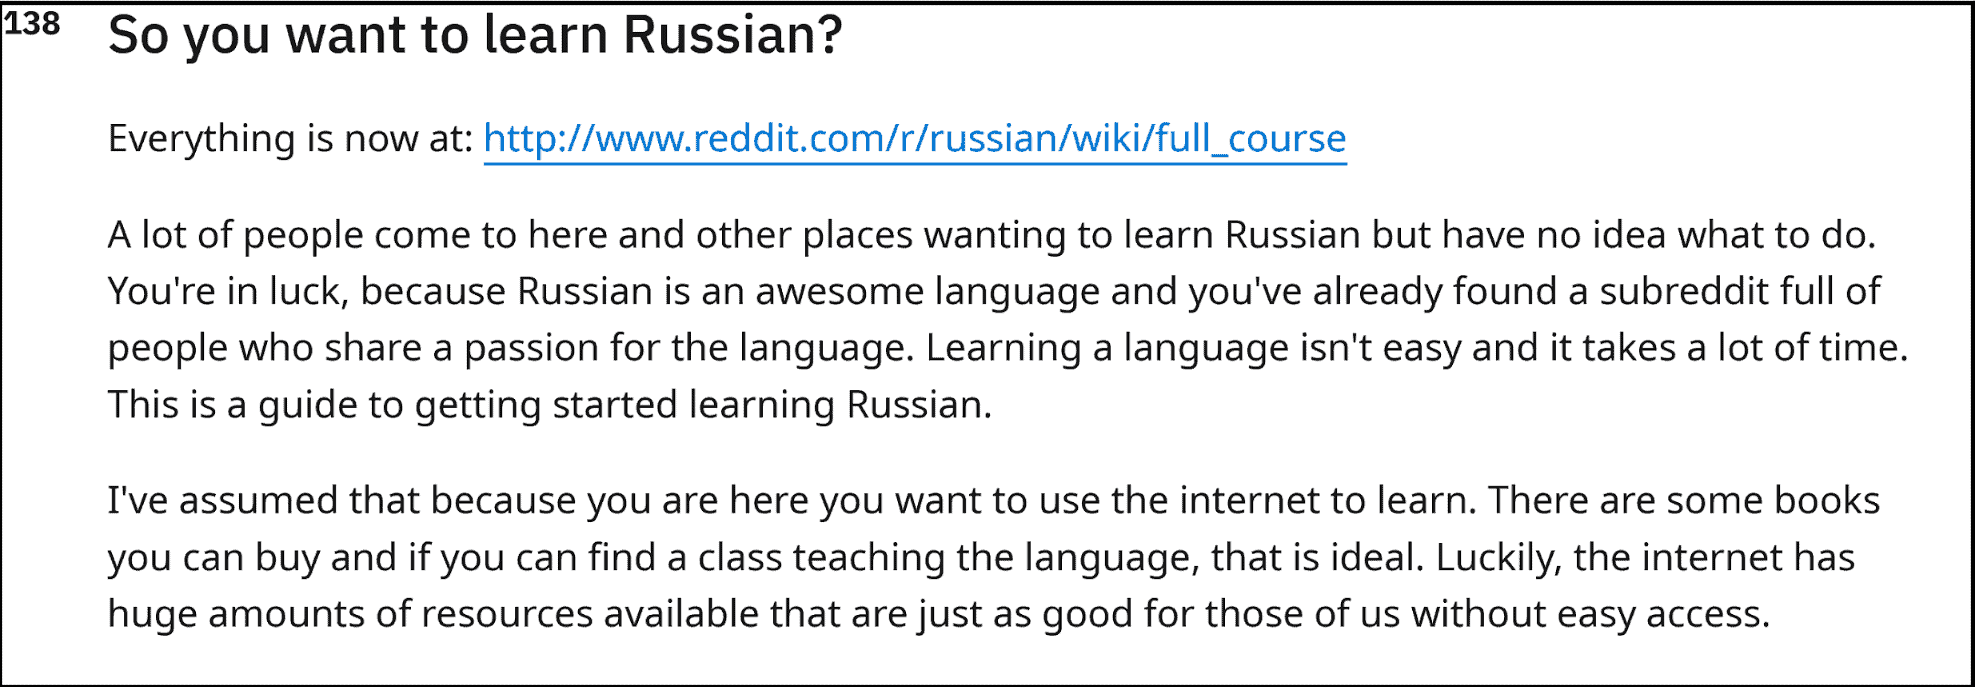 So you want to learn Russian